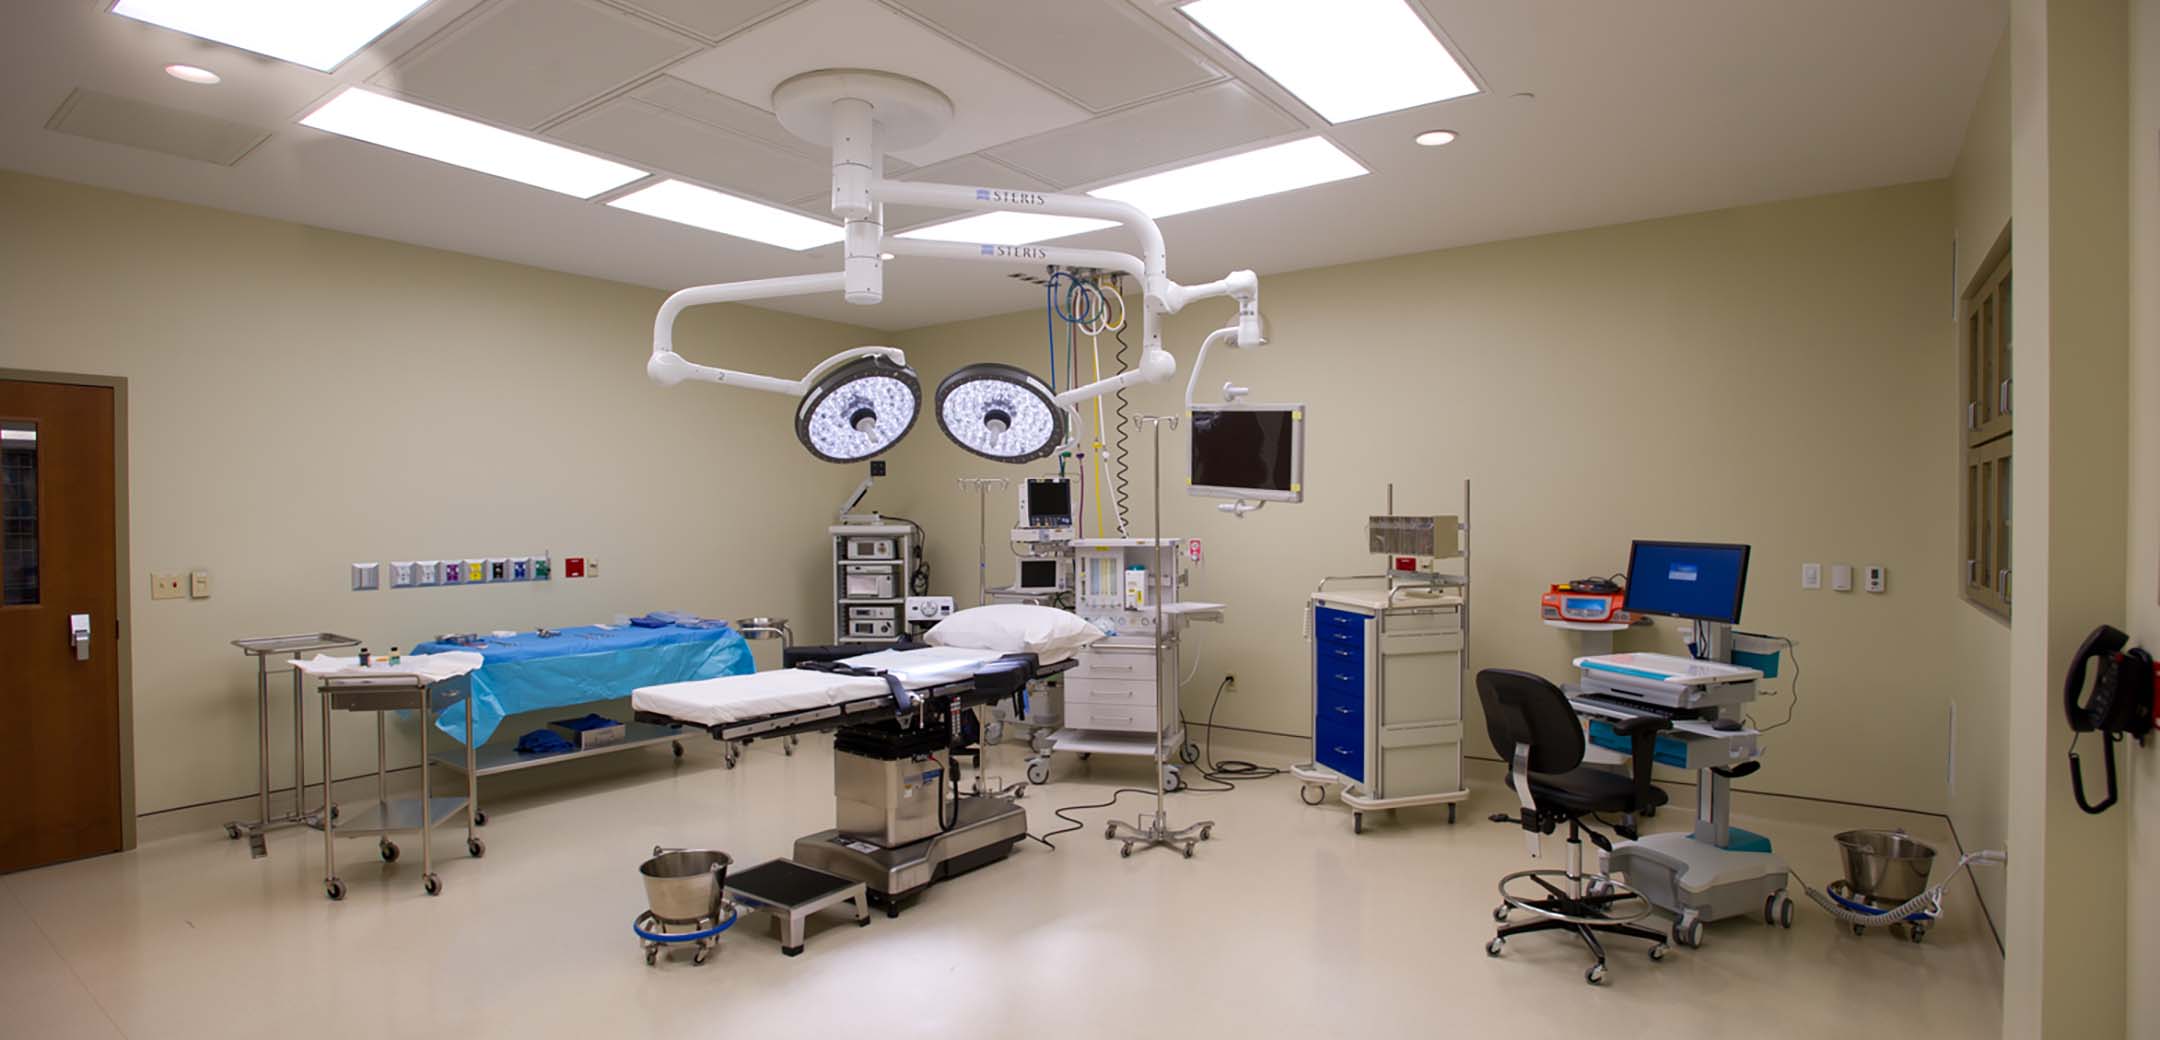 The interior view of the Physician Care Surgical hospital showcasing the large ceiling panel lights and surgery facilities.